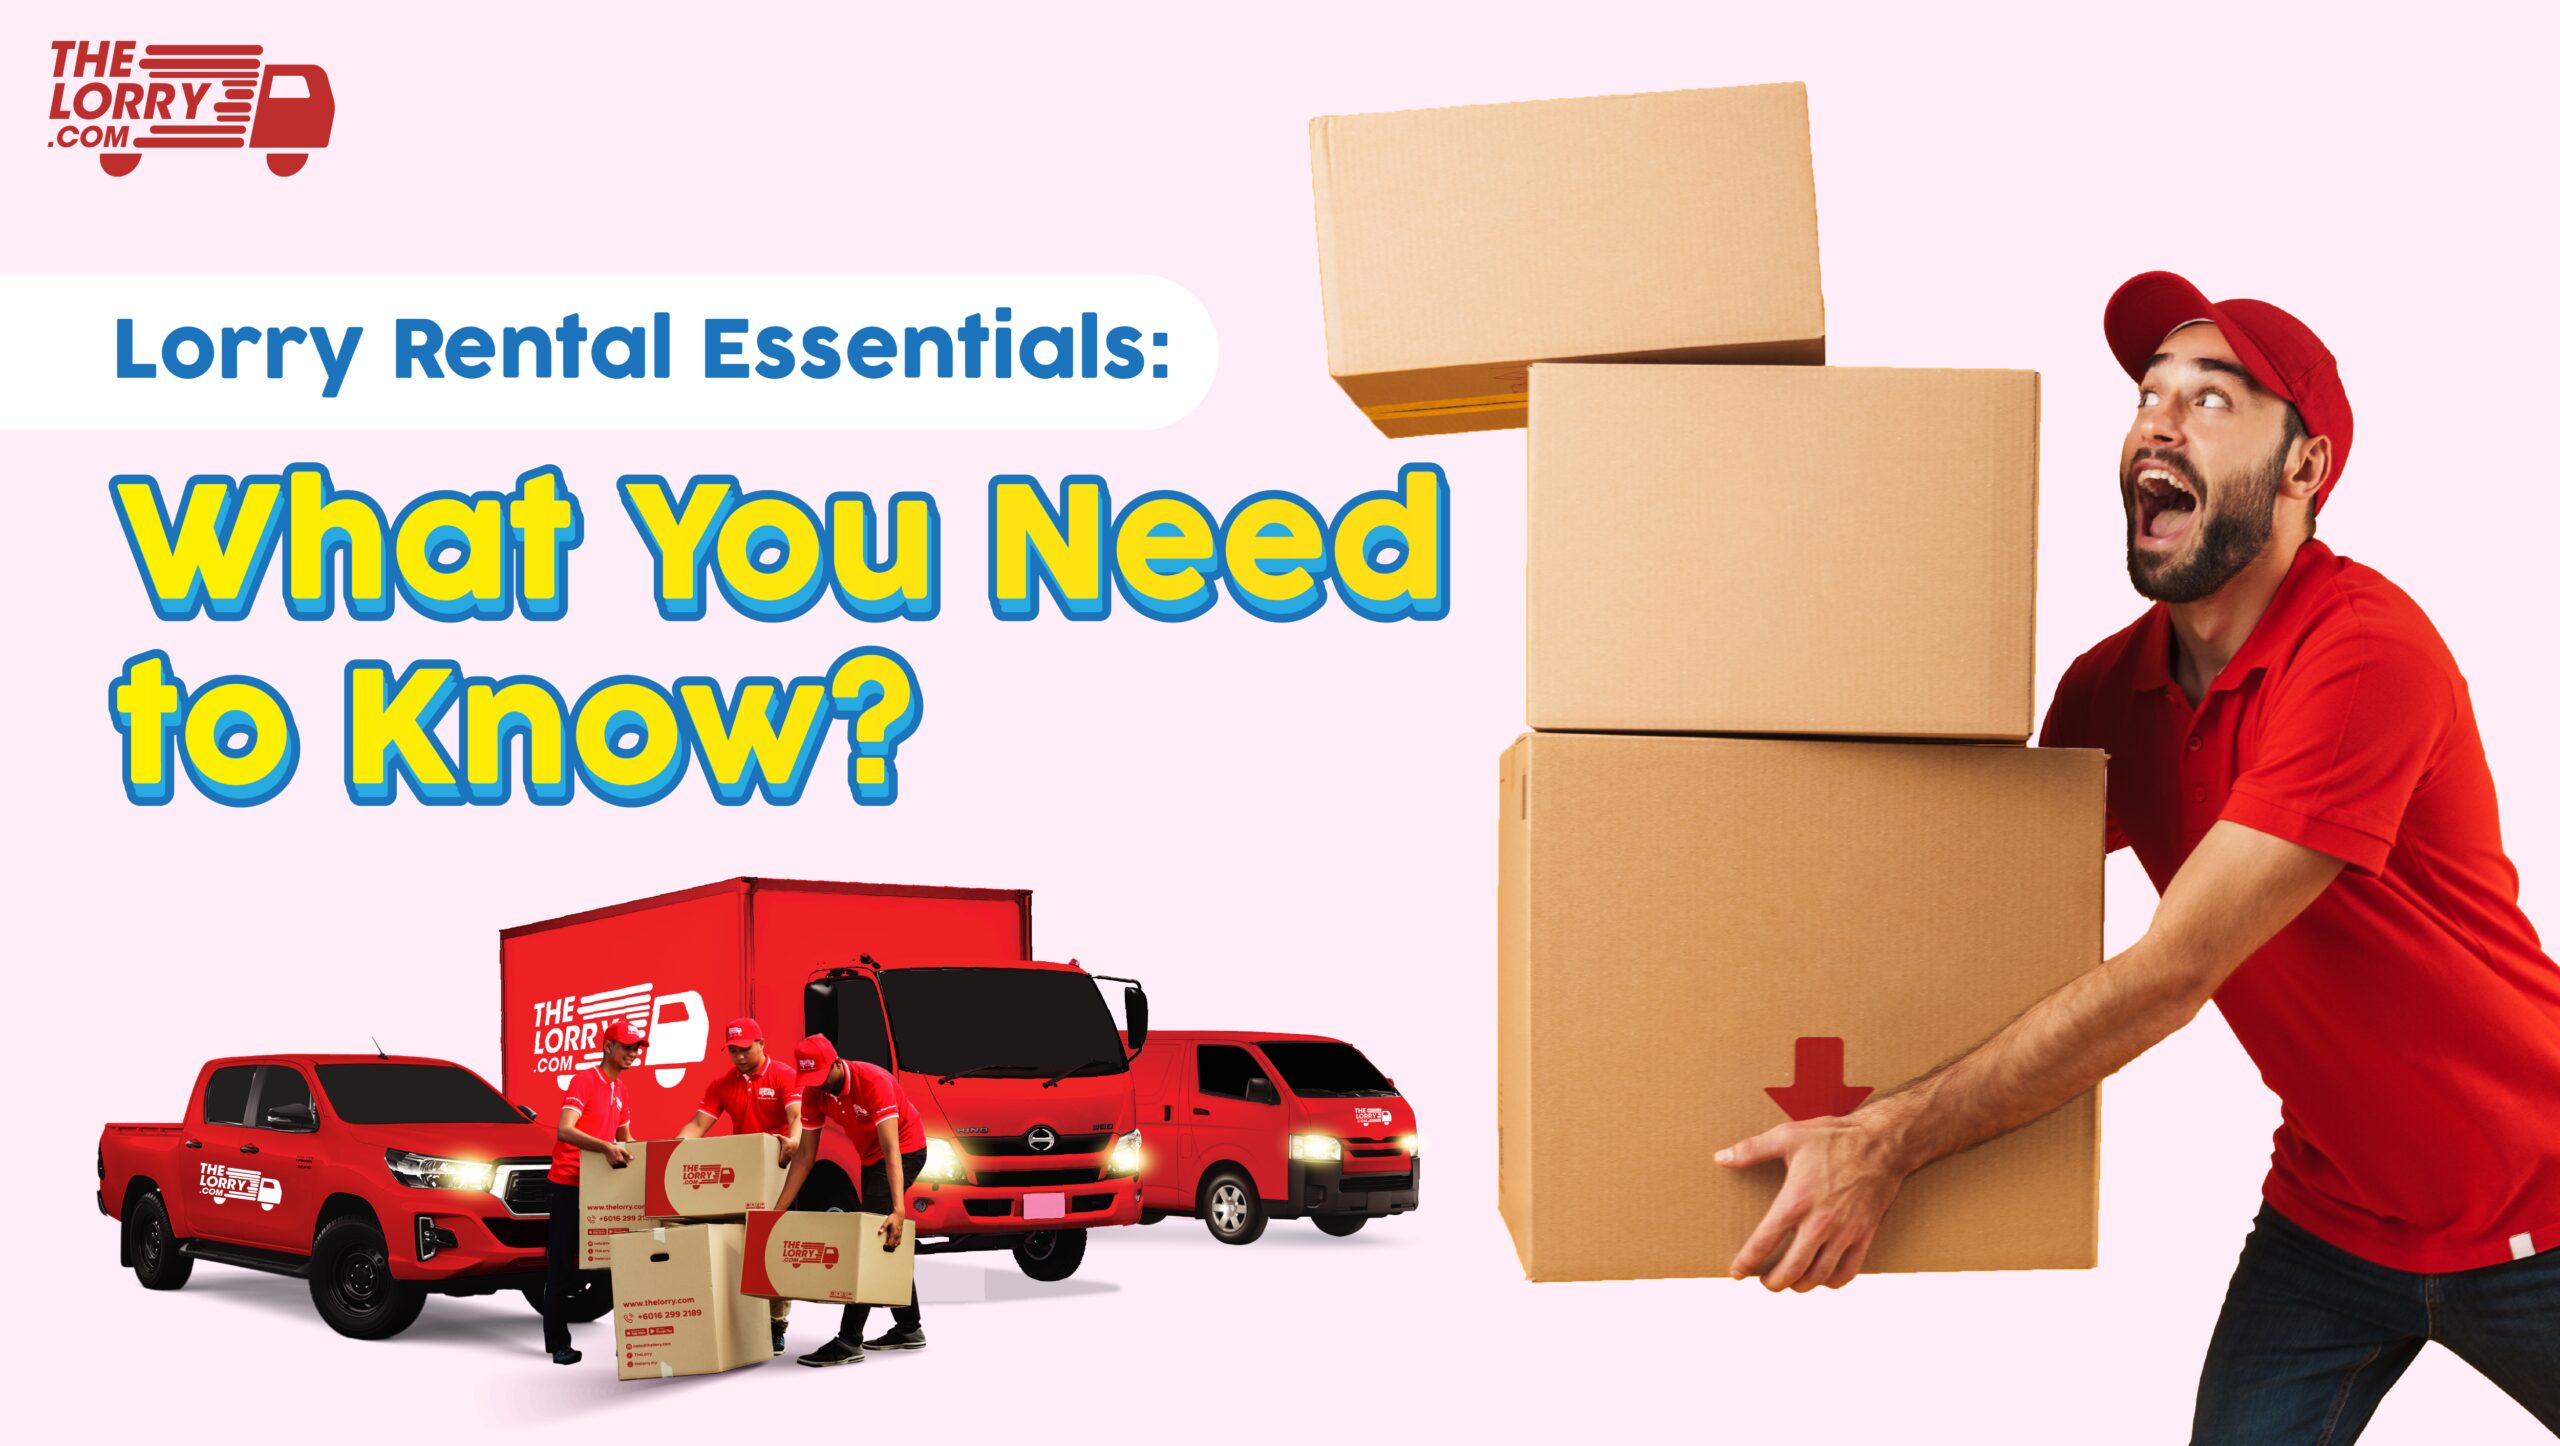 Lorry Rental Essentials: What You Need to Know